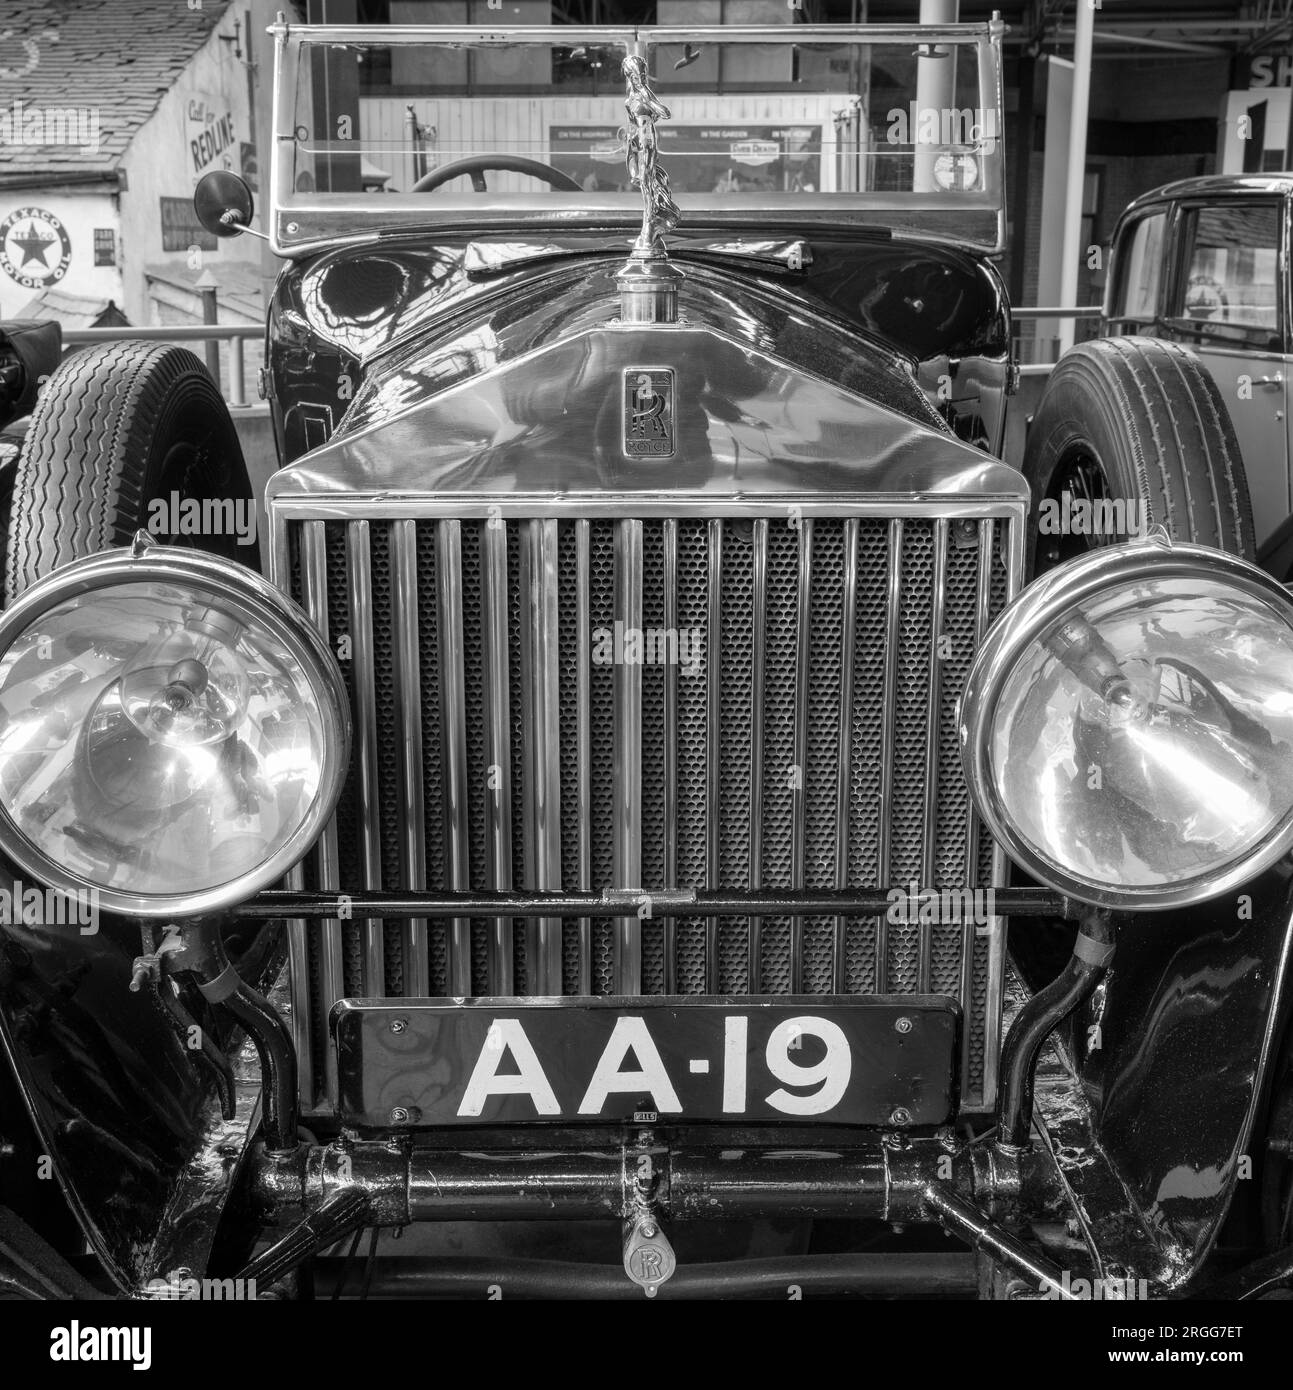 1925 Rolls-Royce 40/50 New Phantom in mostra al National Motor Museum, Beaulieu, New Forest, Hampshire, Inghilterra, REGNO UNITO. Foto Stock